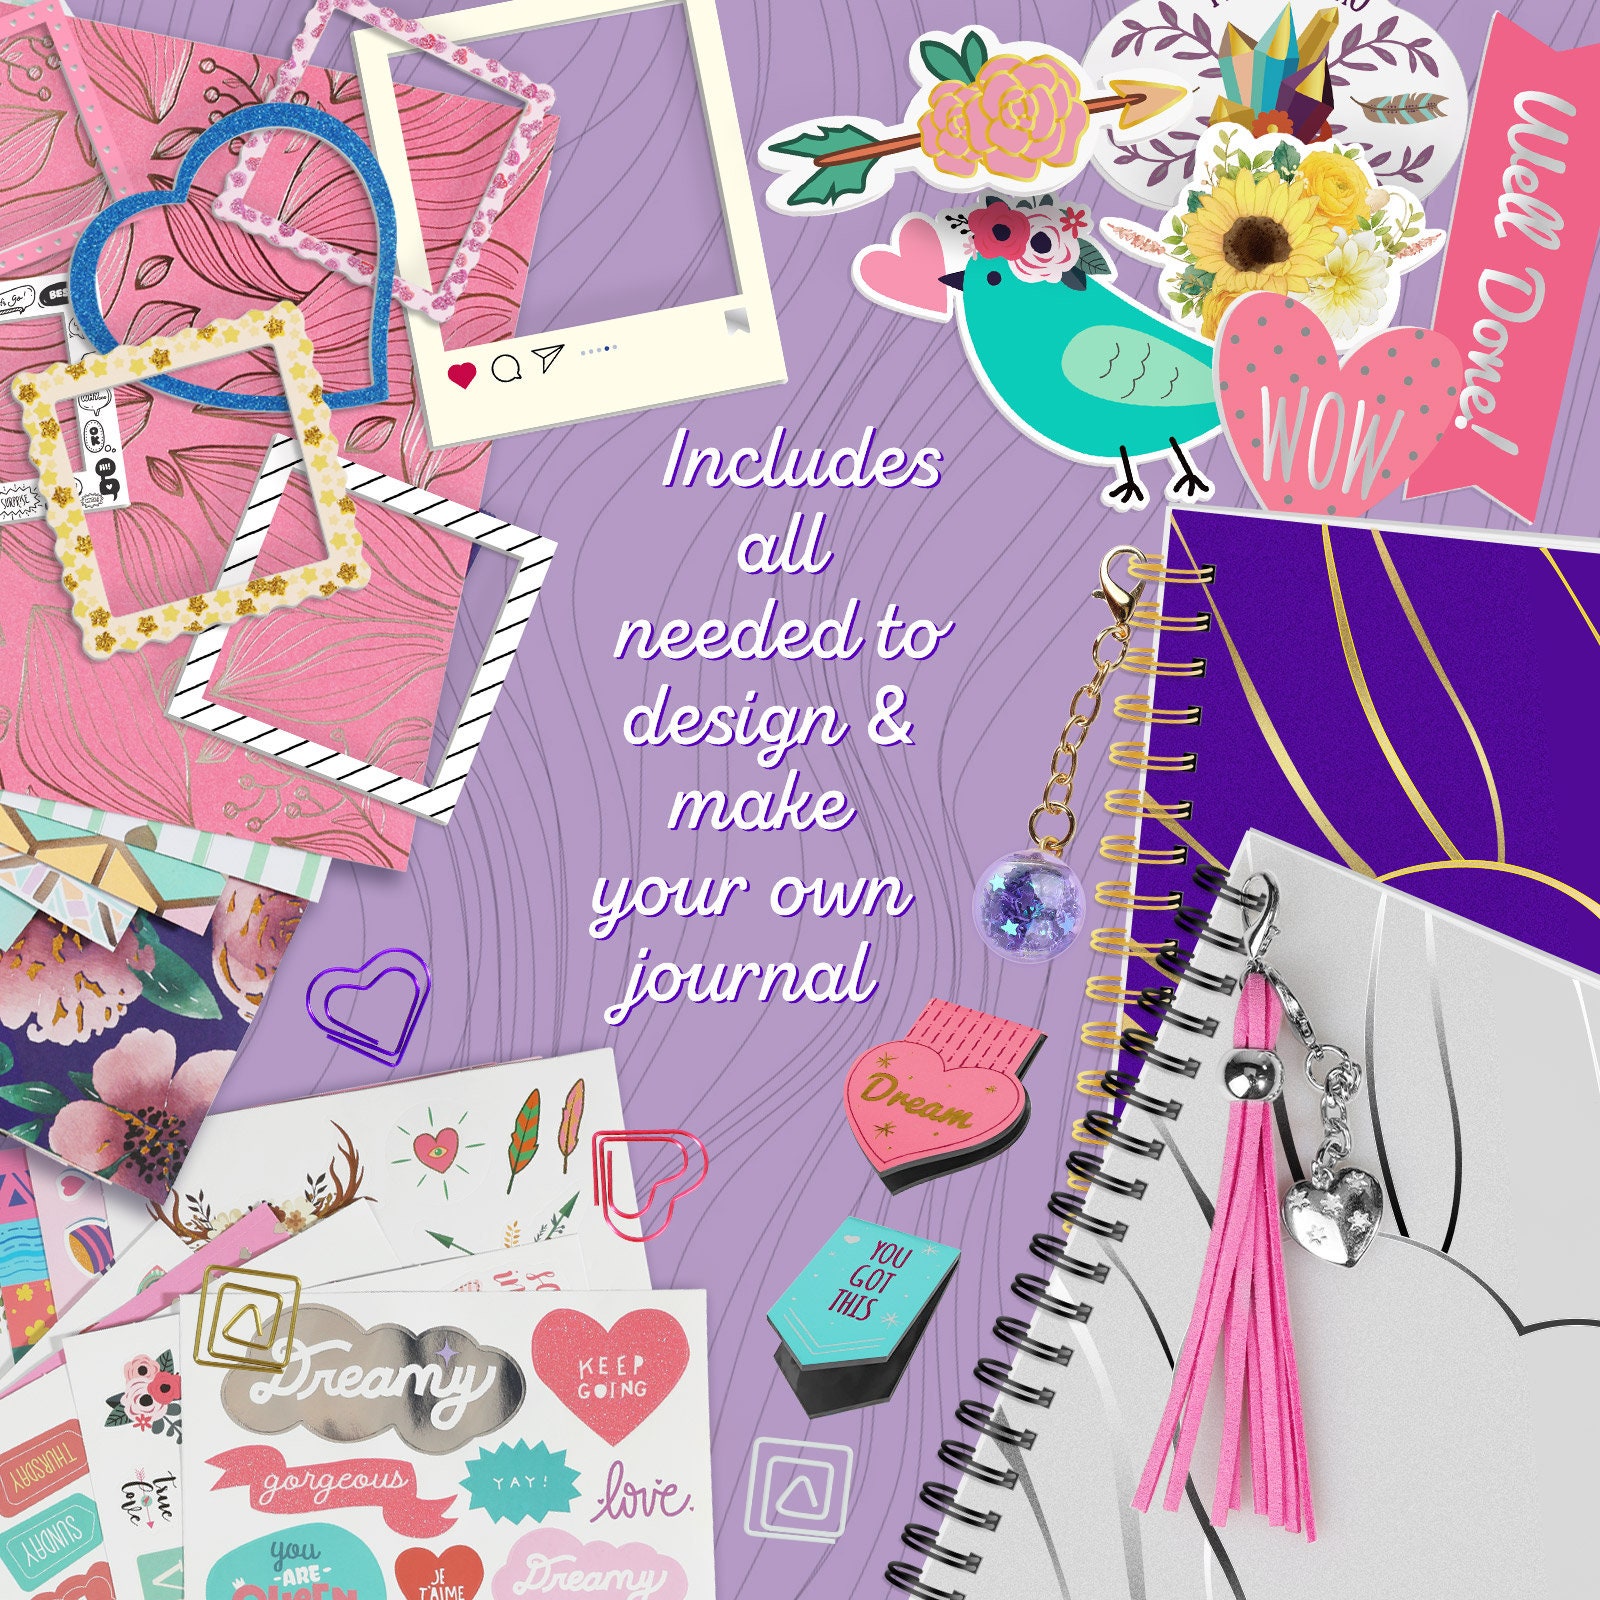  DIY Journal Set for Girls Ages 8 9 10 11 12 13 Years Old and  Up, Desirable Gifts for Girls - Scrapbooking, Make Diary Handbooks, DIY  Journal Kit - Perfect Art